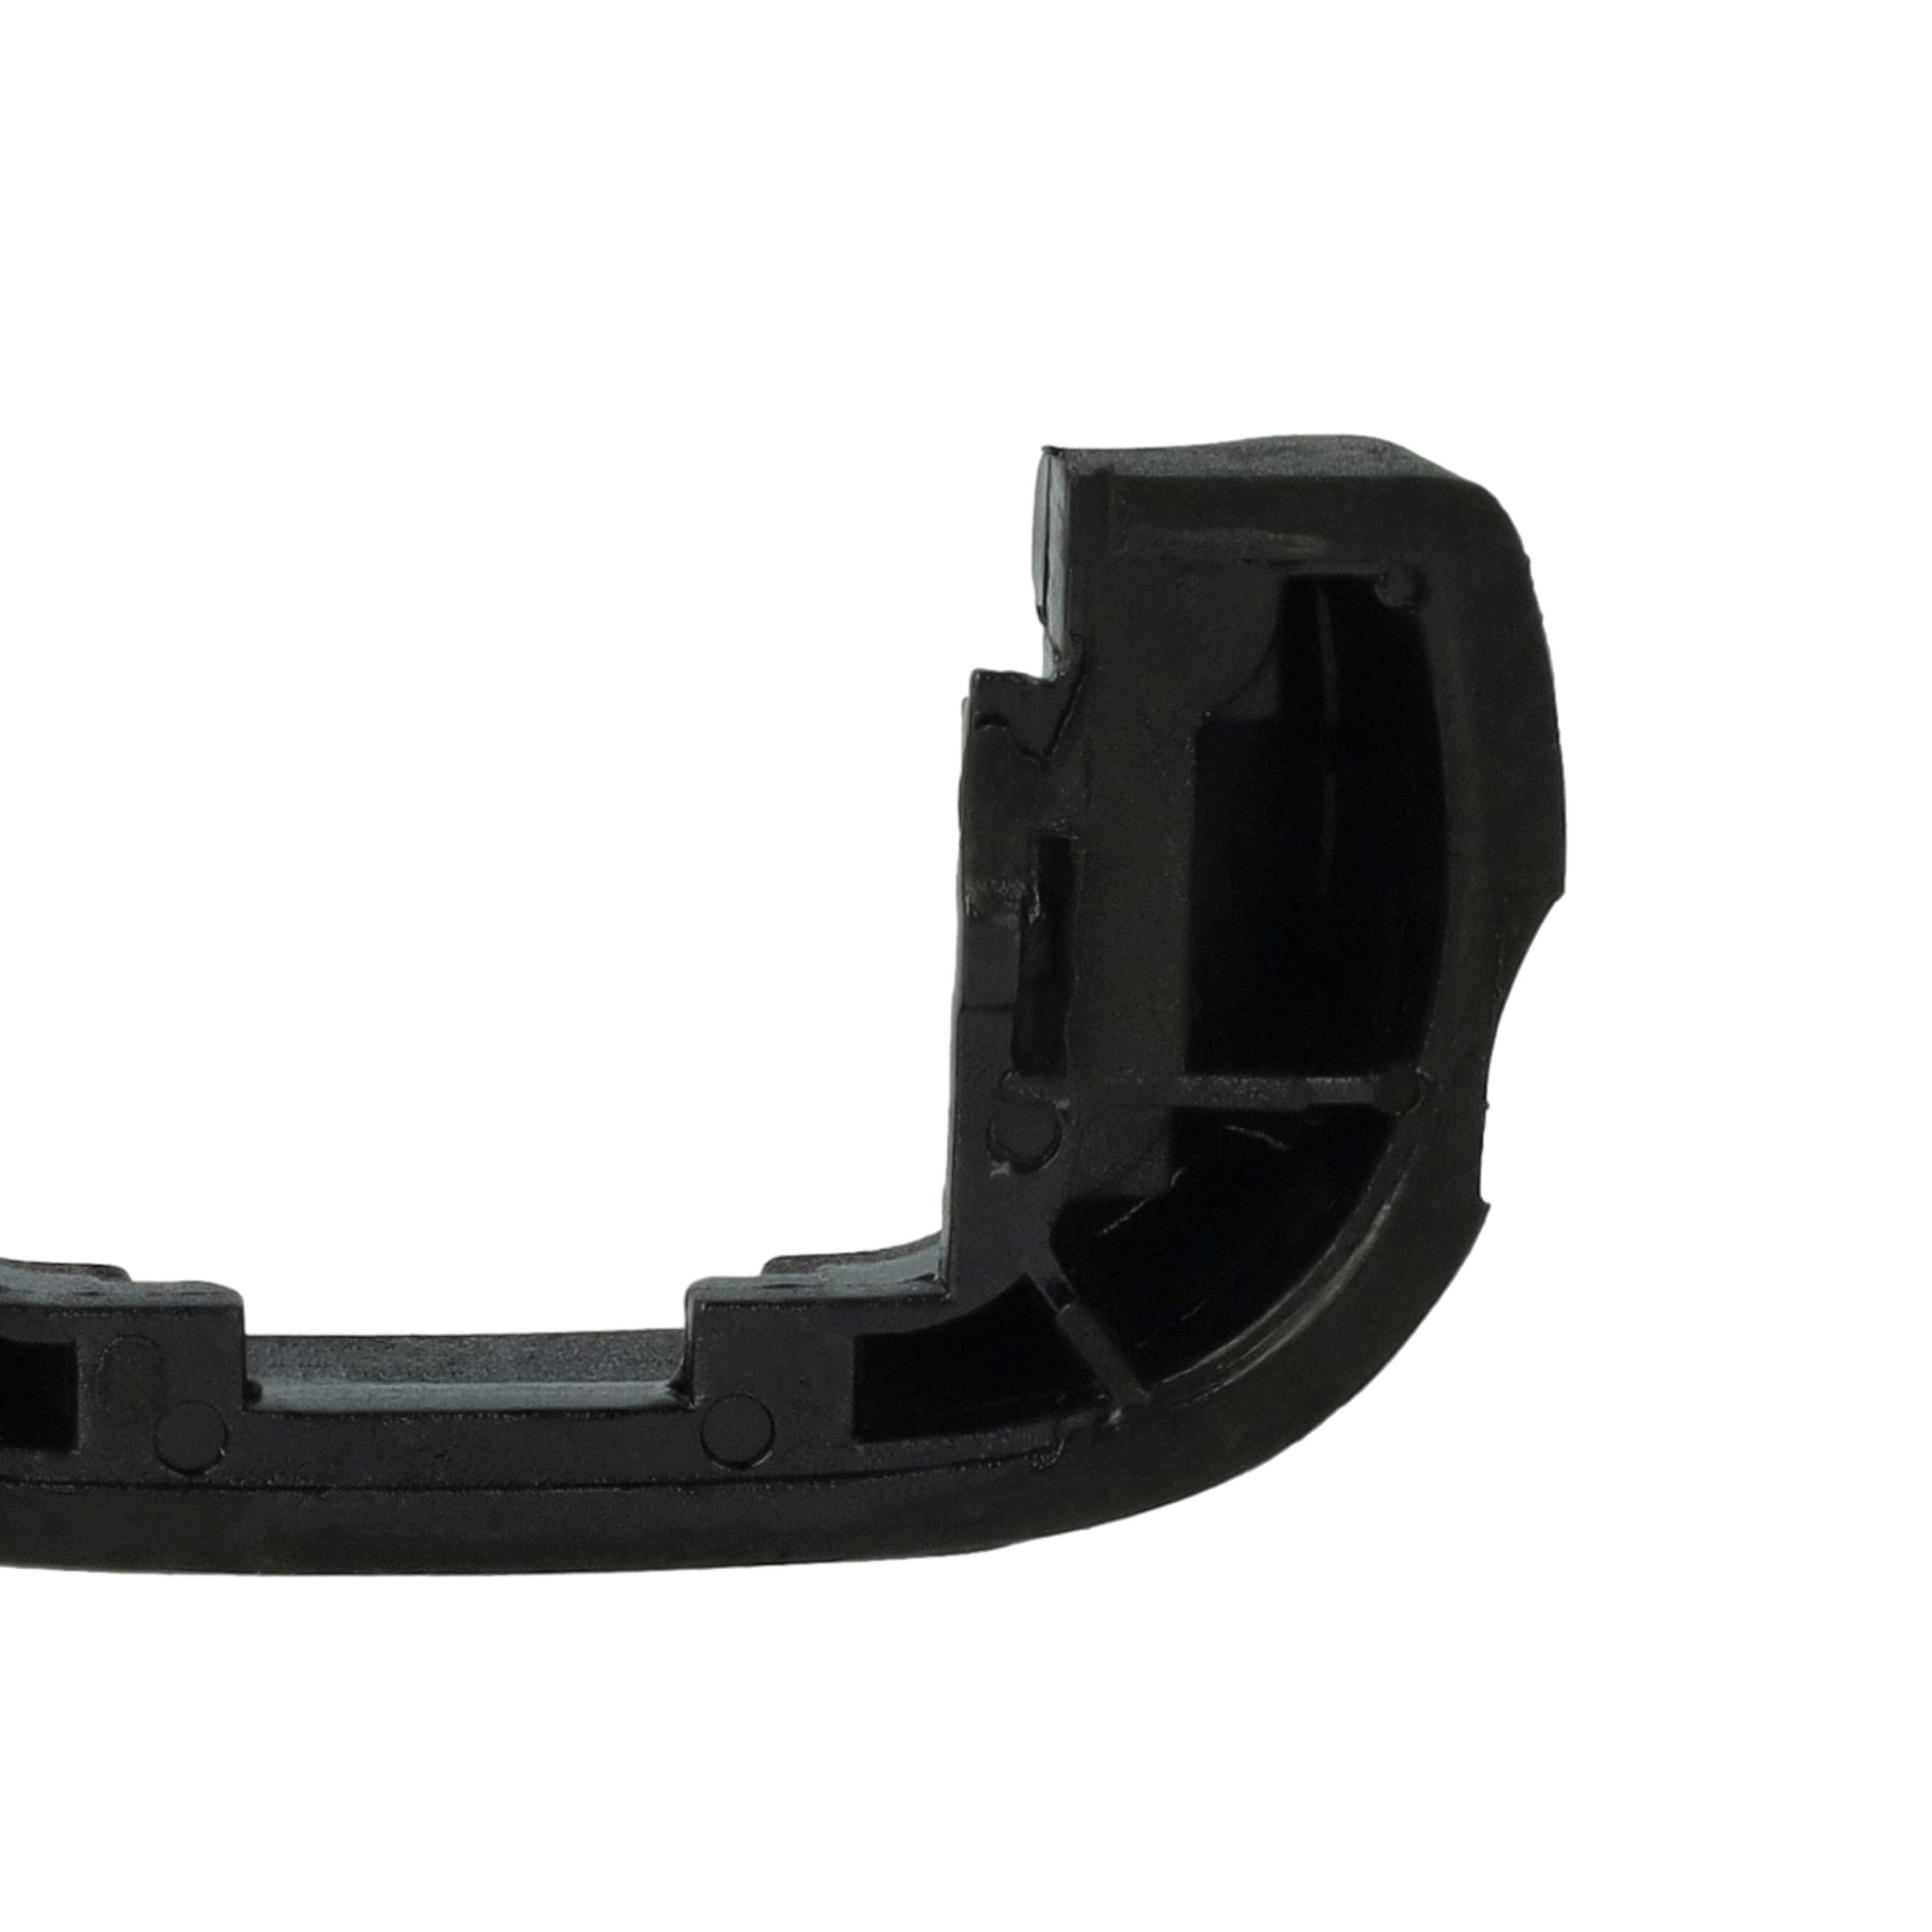 Eye Cup replaces Sony FDA-EP12 for Sony A7 Mark II etc., Plastic 